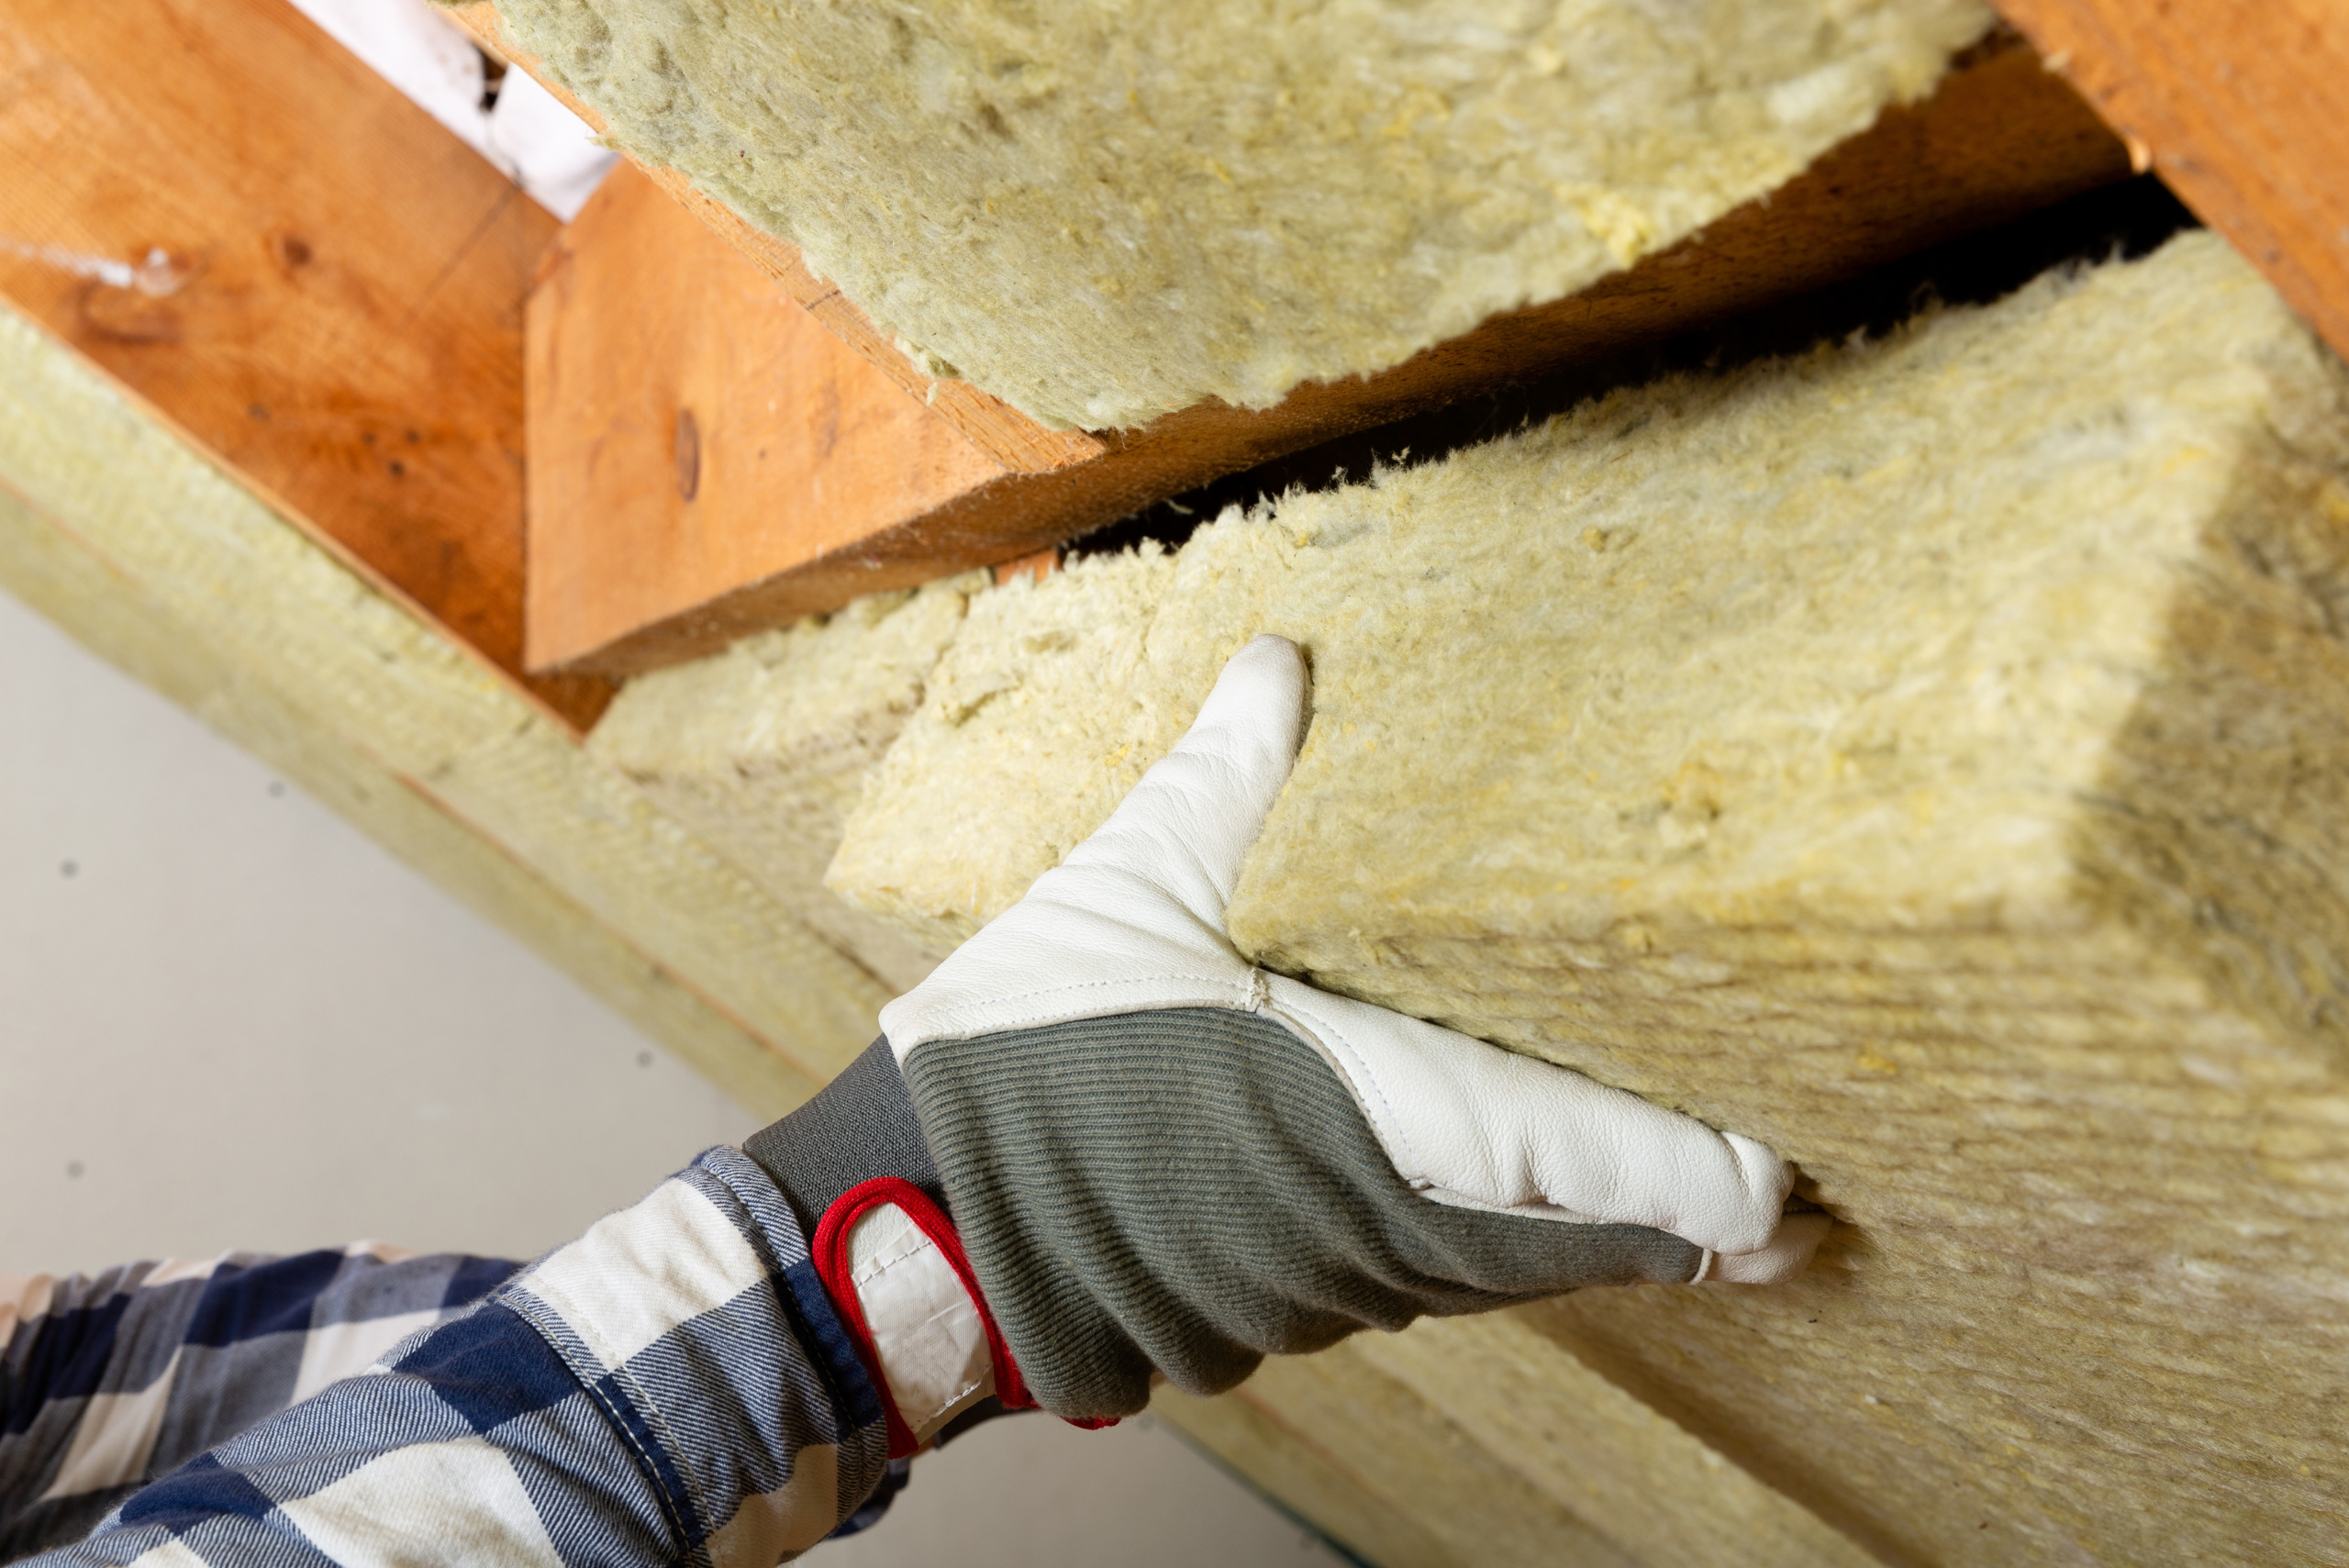 A worker's hand wearing gloves while installing insulation.